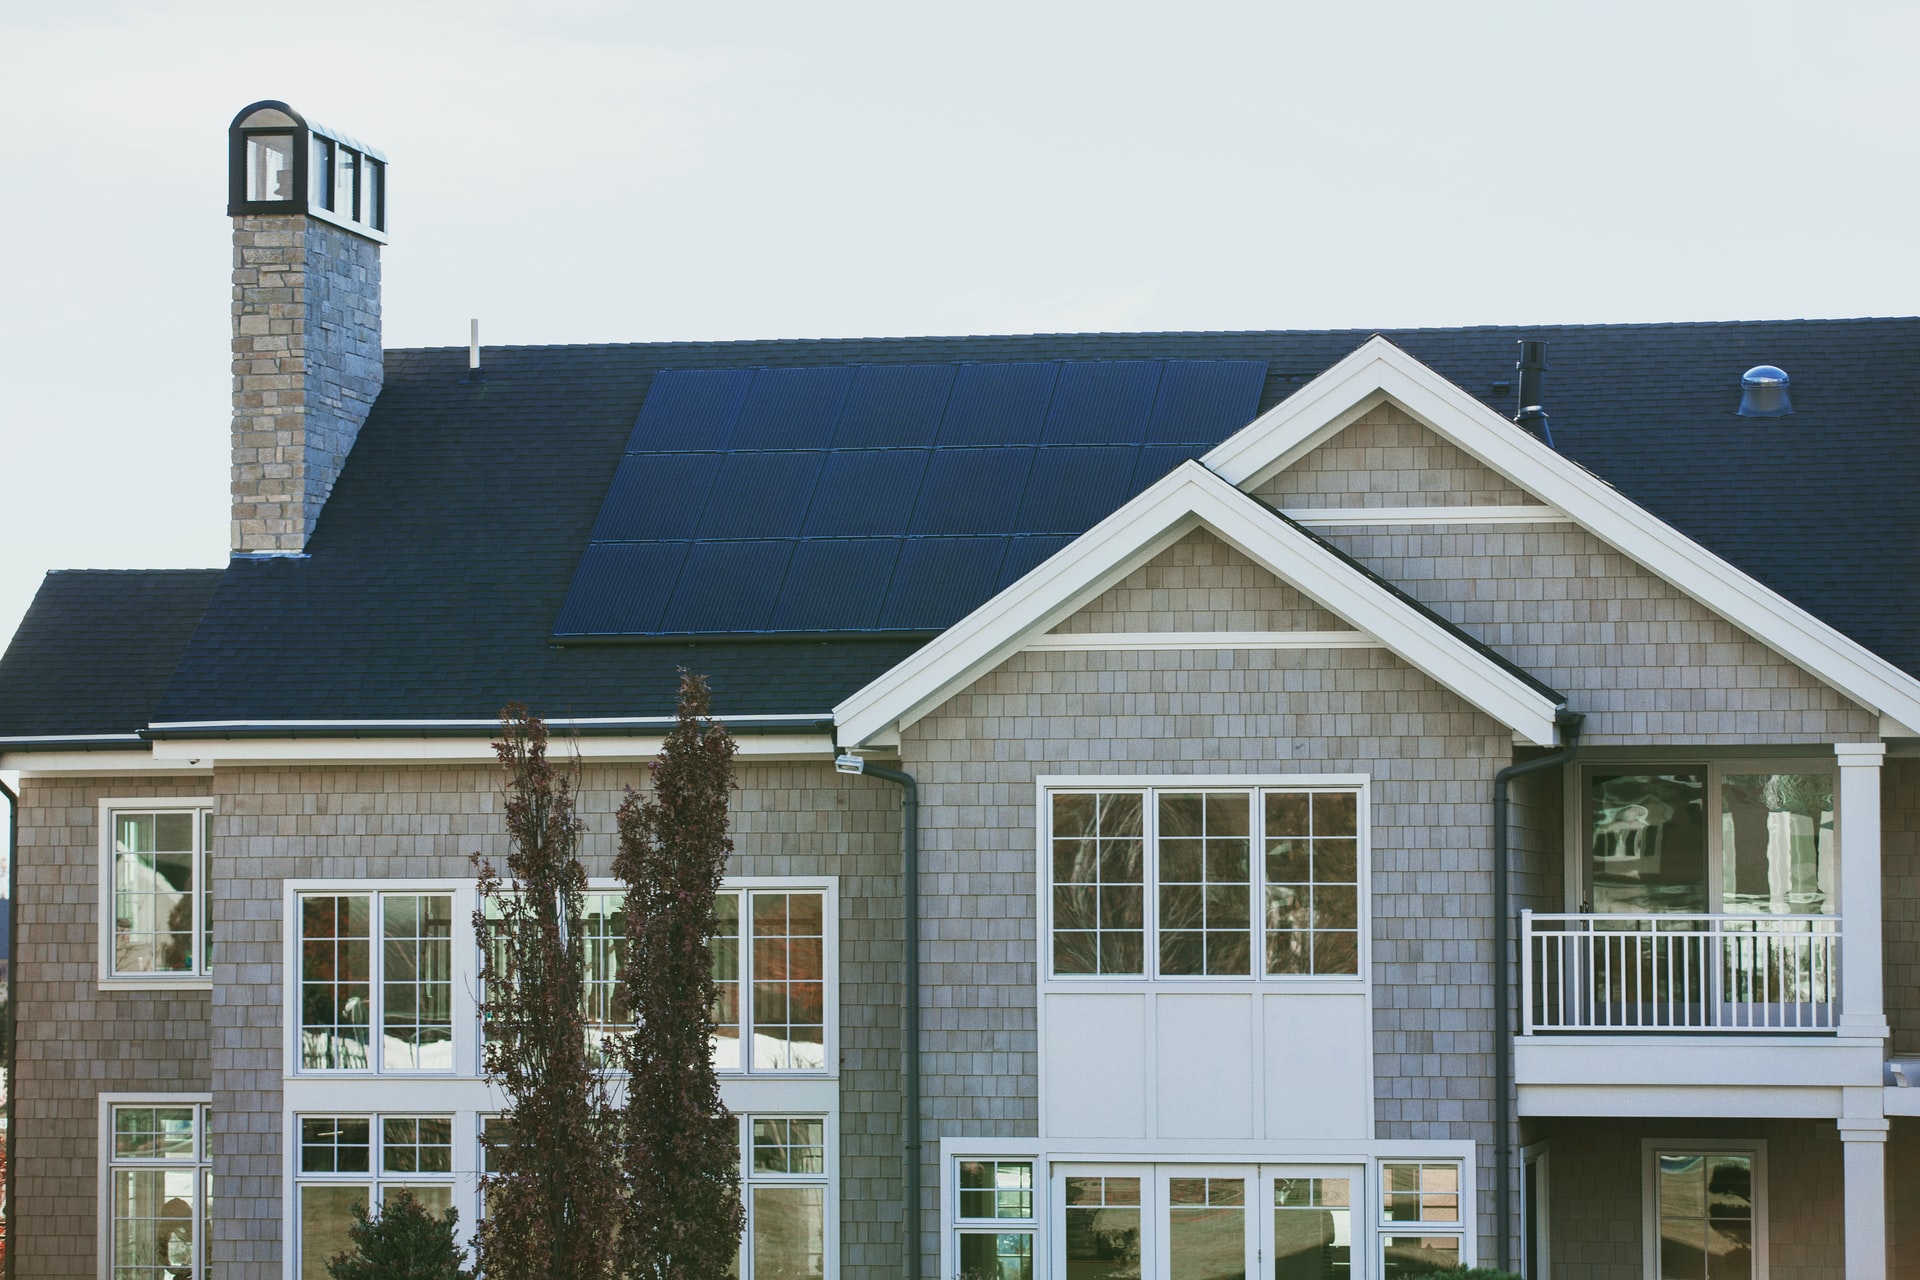 Installing Solar Panels? Here’s Why You Should Hold Off on Battery Storage